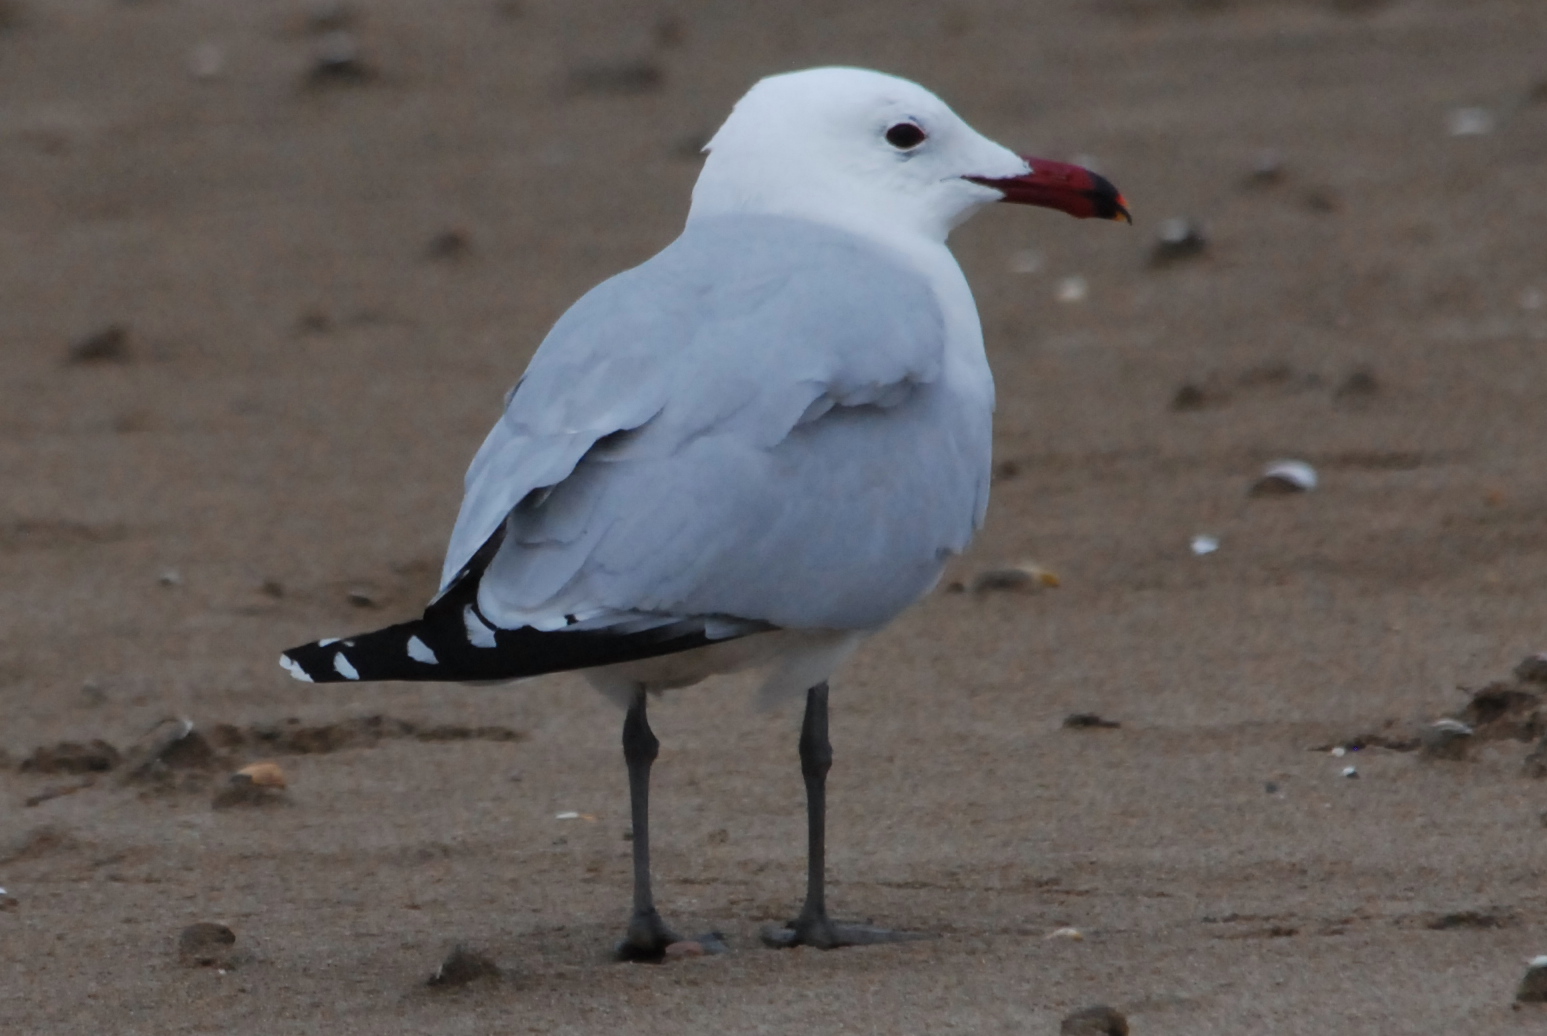 Click picture to see more Audouin's Gulls.